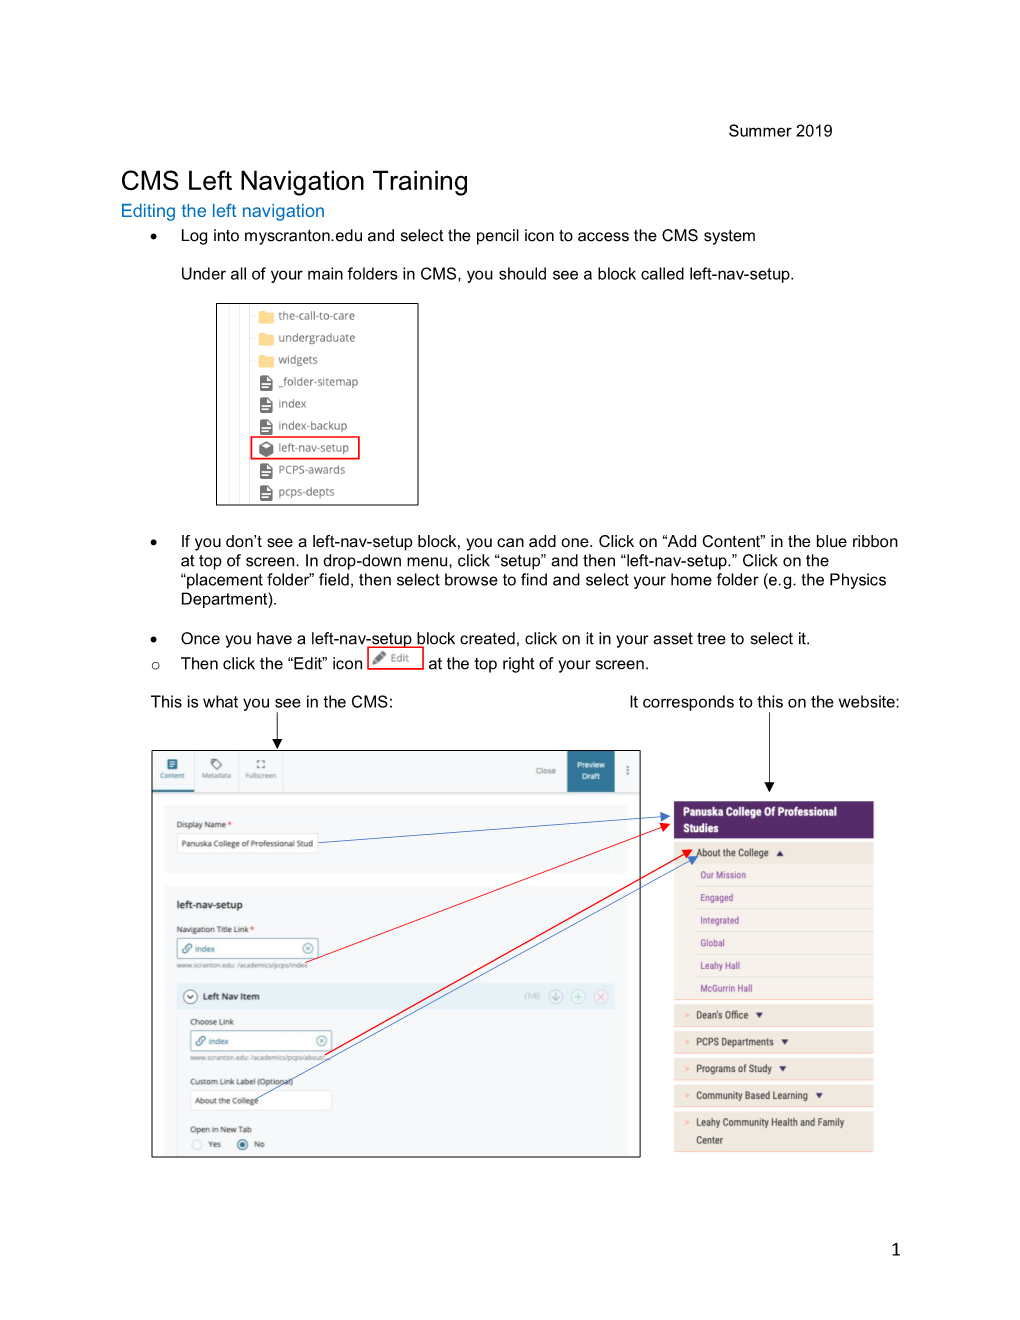 CMS Left Navigation Training Editing the Left Navigation • Log Into Myscranton.Edu and Select the Pencil Icon to Access the CMS System